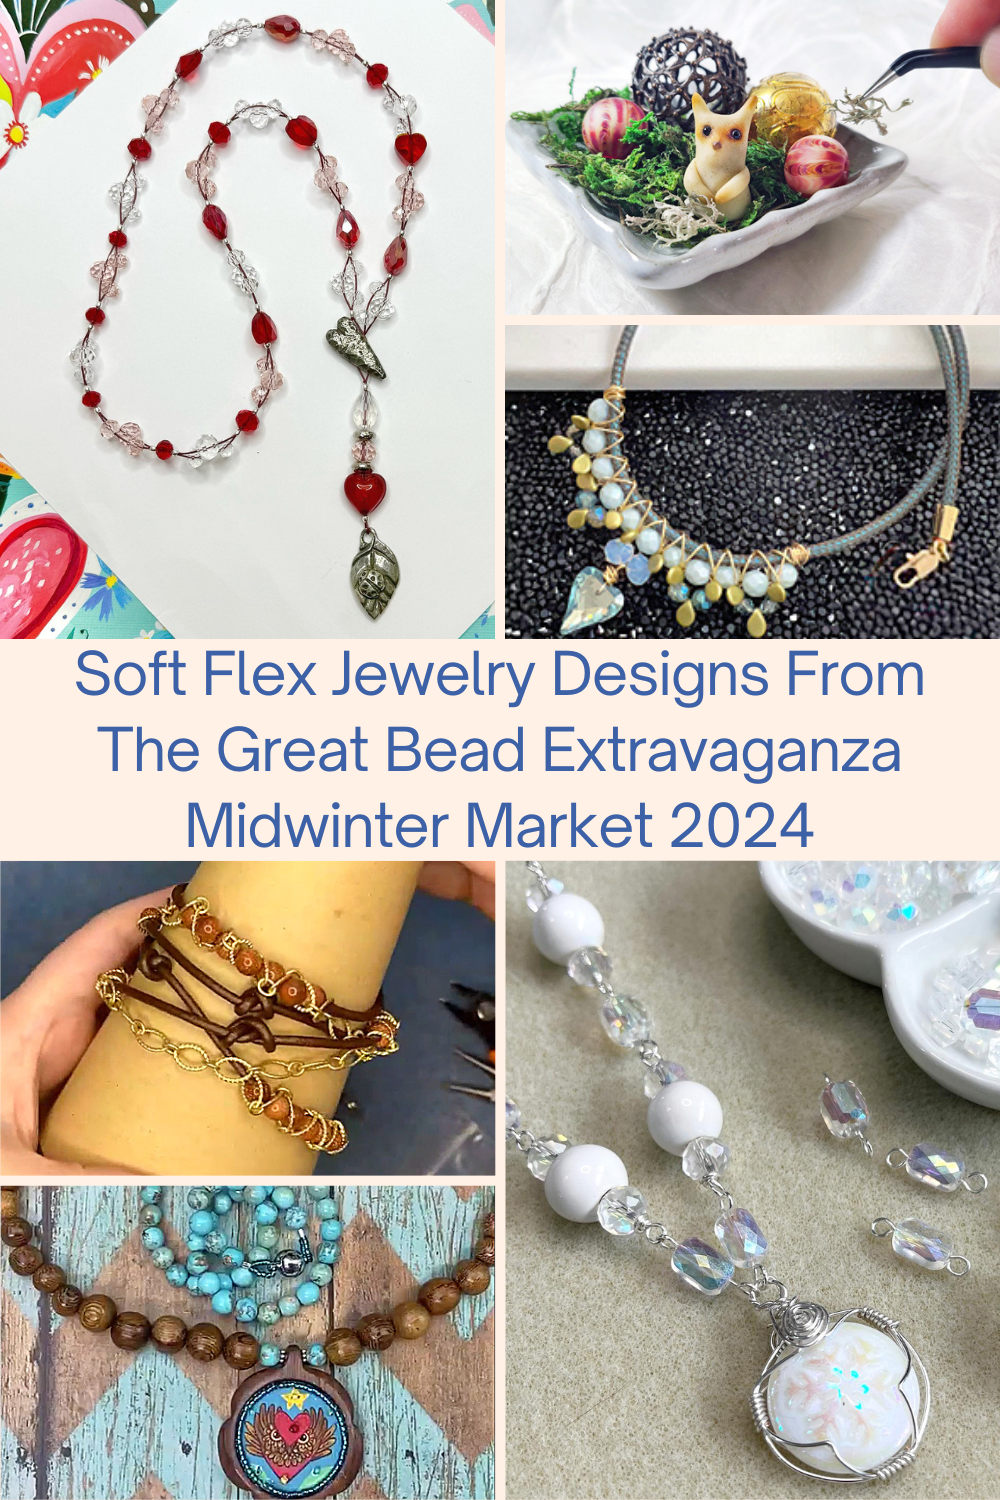 Soft Flex Jewelry Designs From The Great Bead Extravaganza Midwinter Market 2024 Collage